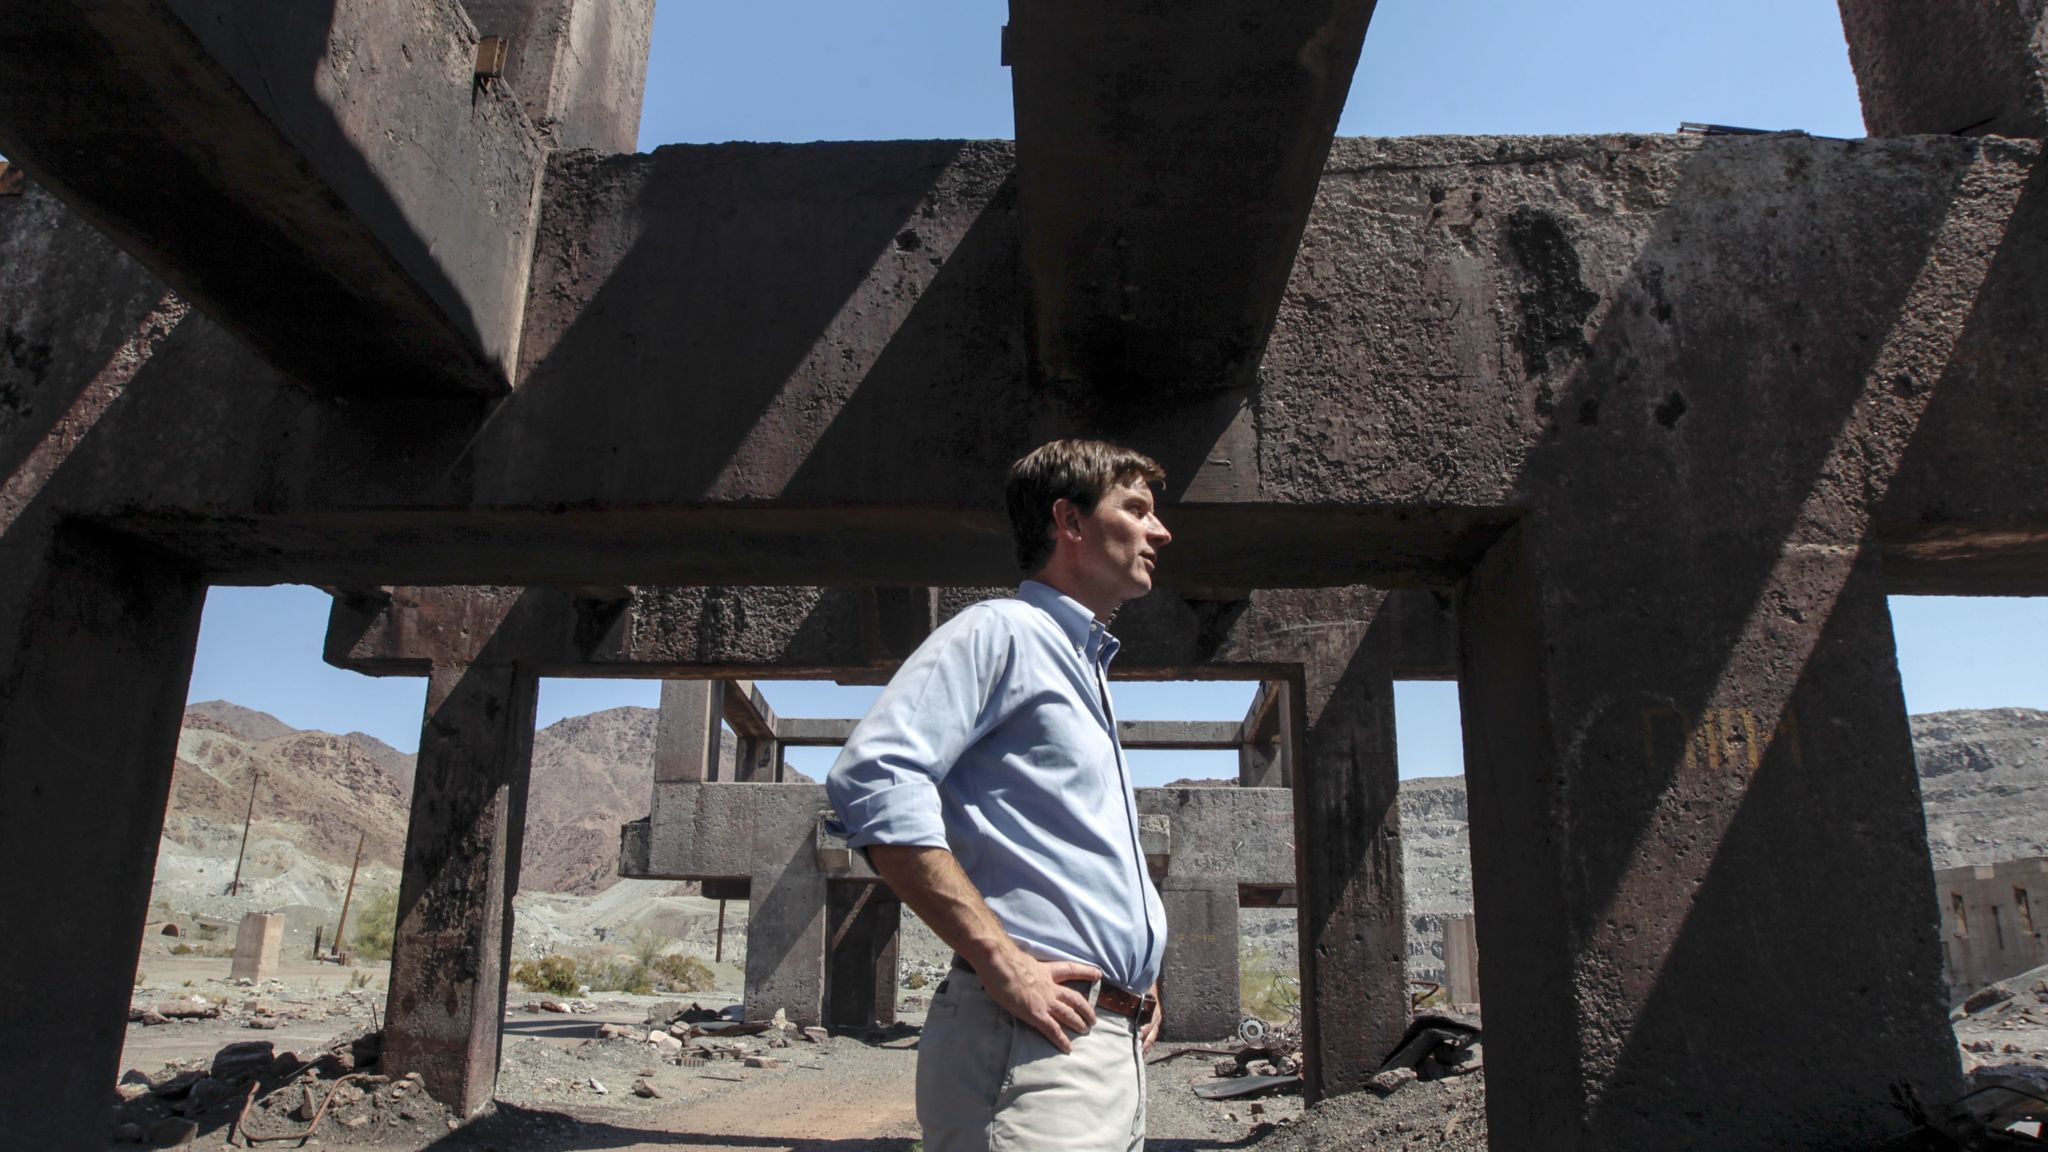 Steve Lowe, president of Eagle Crest Energy Co., stands amid the ruins of the ore loading area.